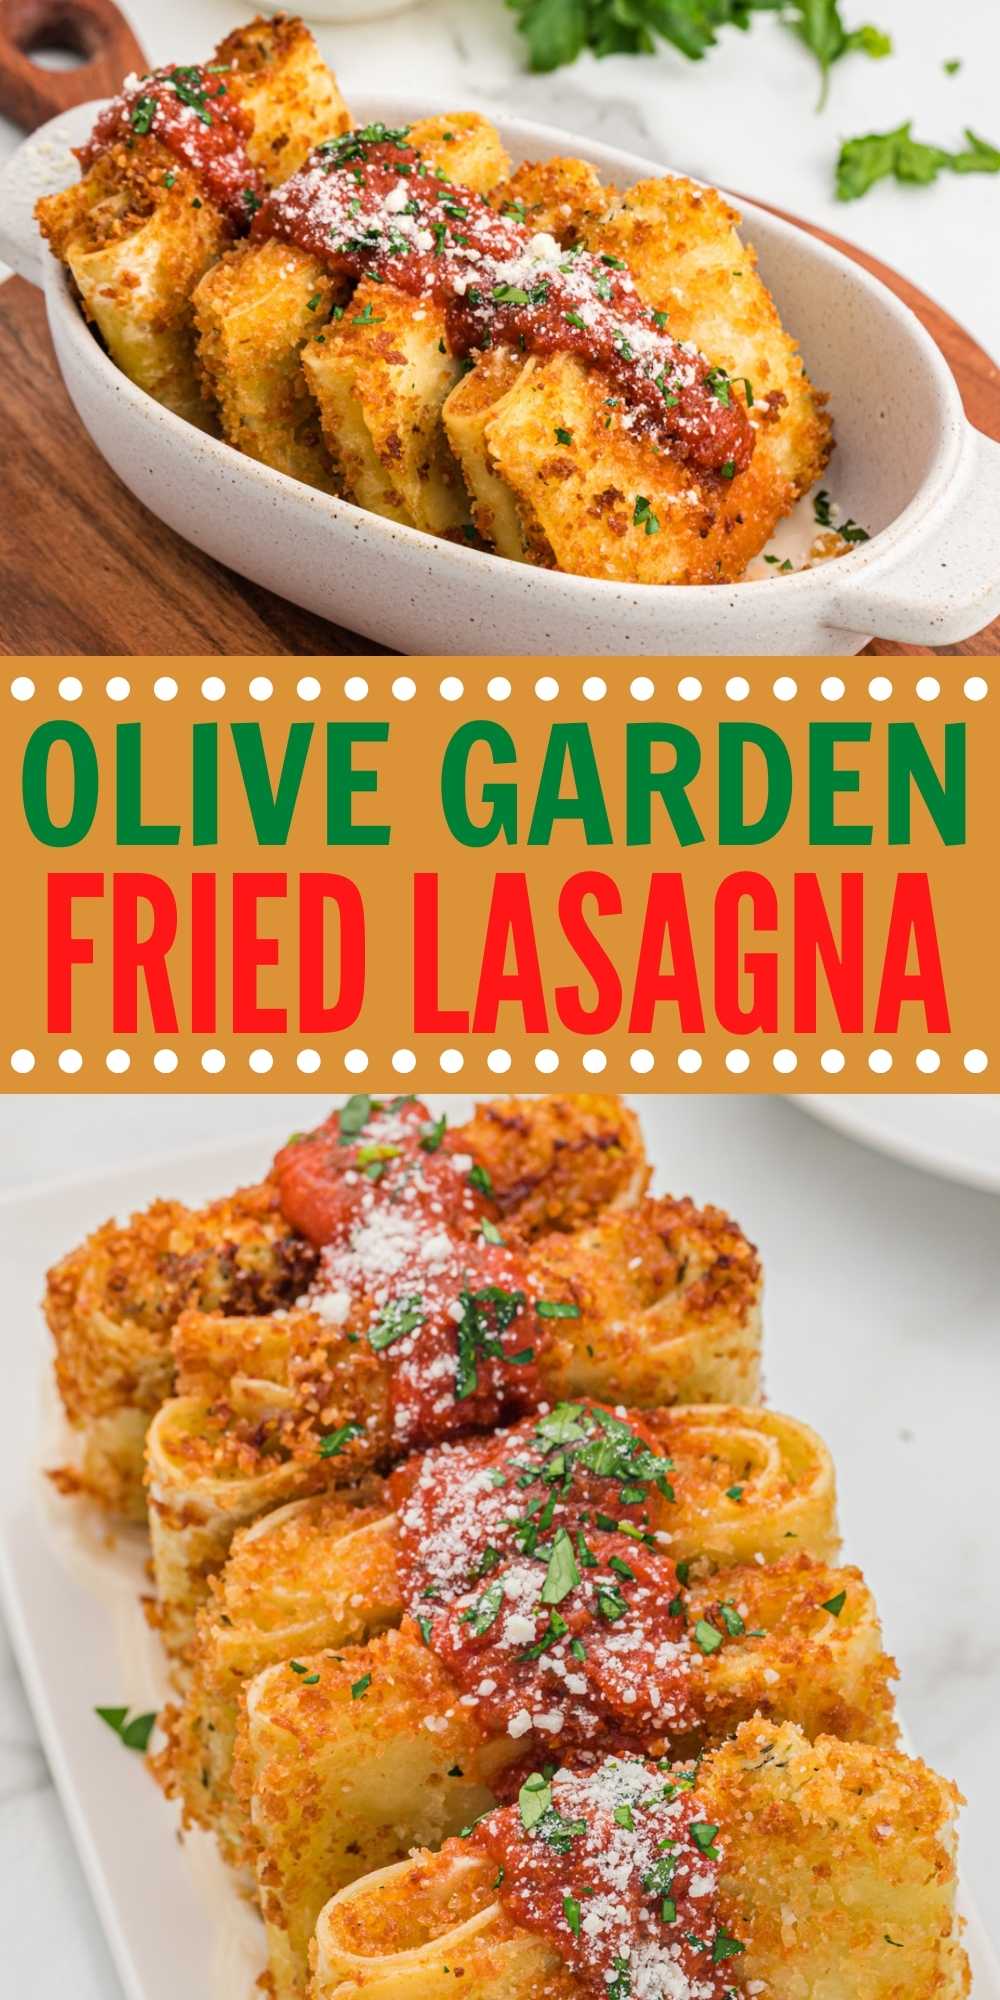 Olive Garden Fried Lasagna is a traditional lasagna dish that is deep fried to perfection. This Italian dish is delicious and easy to make. Make it as an appetizer or a main dish. Simple ingredient copycat recipe. #eatingonadime #olivegarden #friedlasagna #copycatrecipes